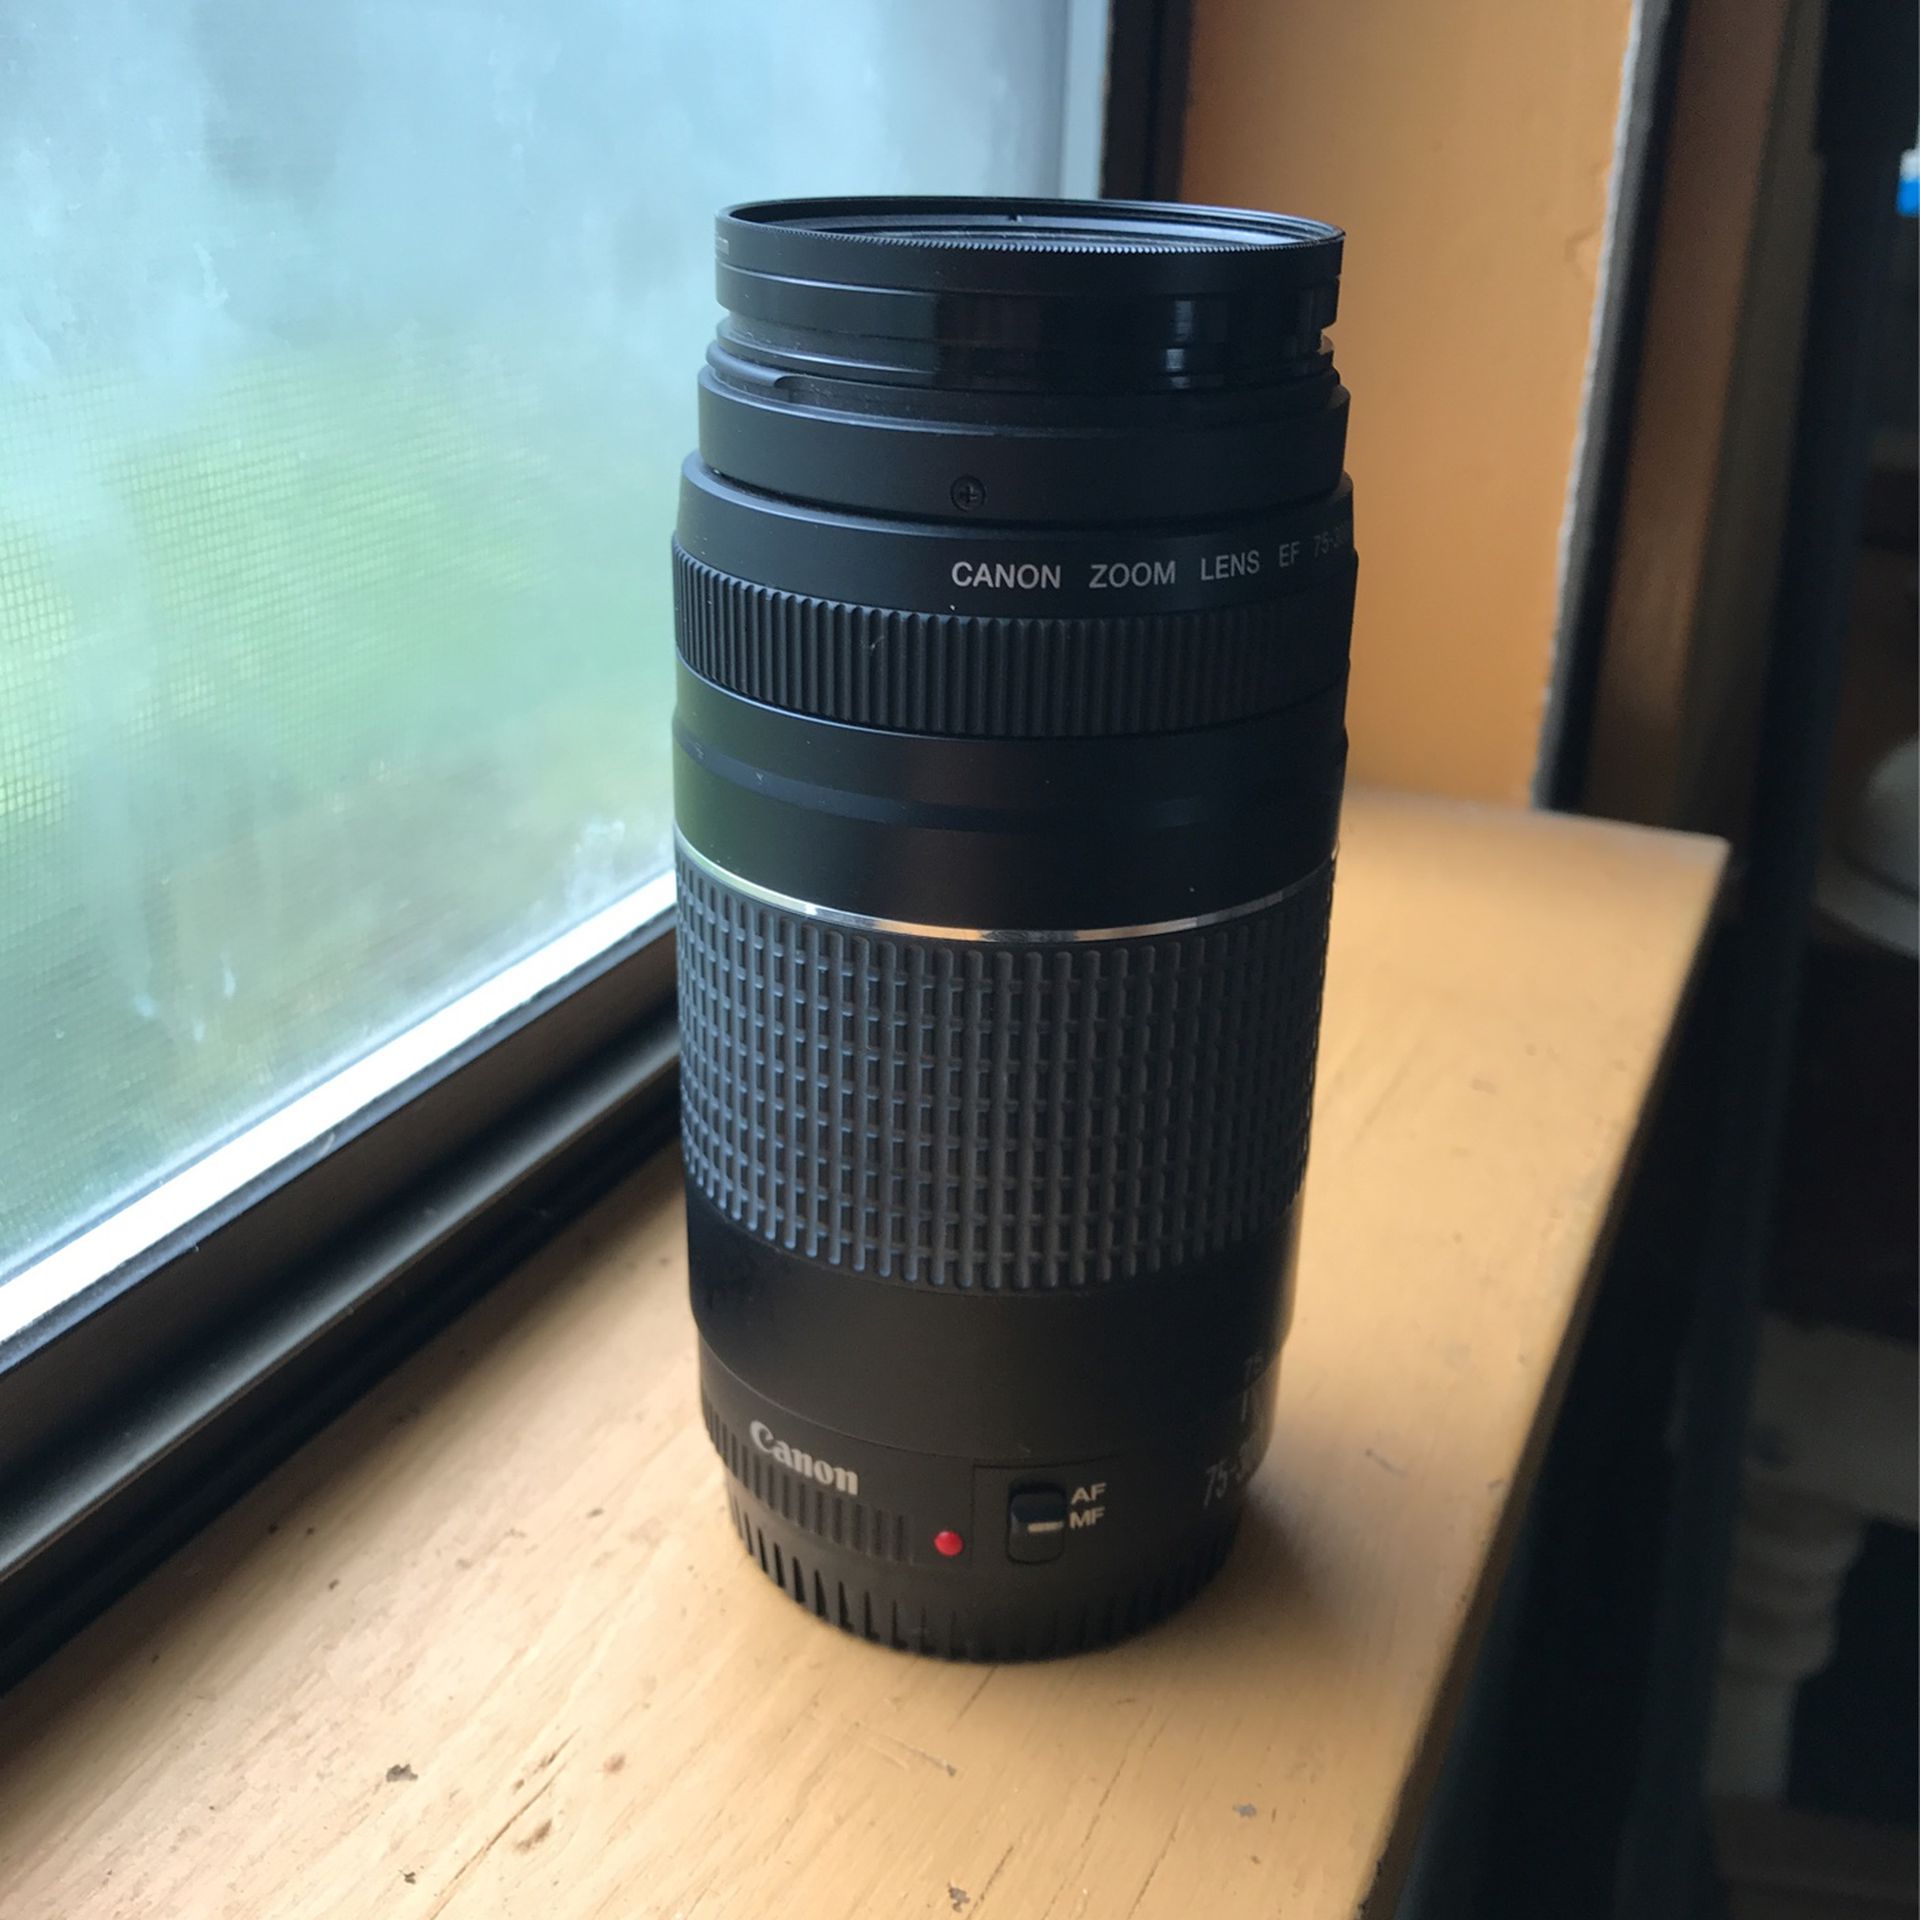 Canon Zoom Lens and Battery Pack